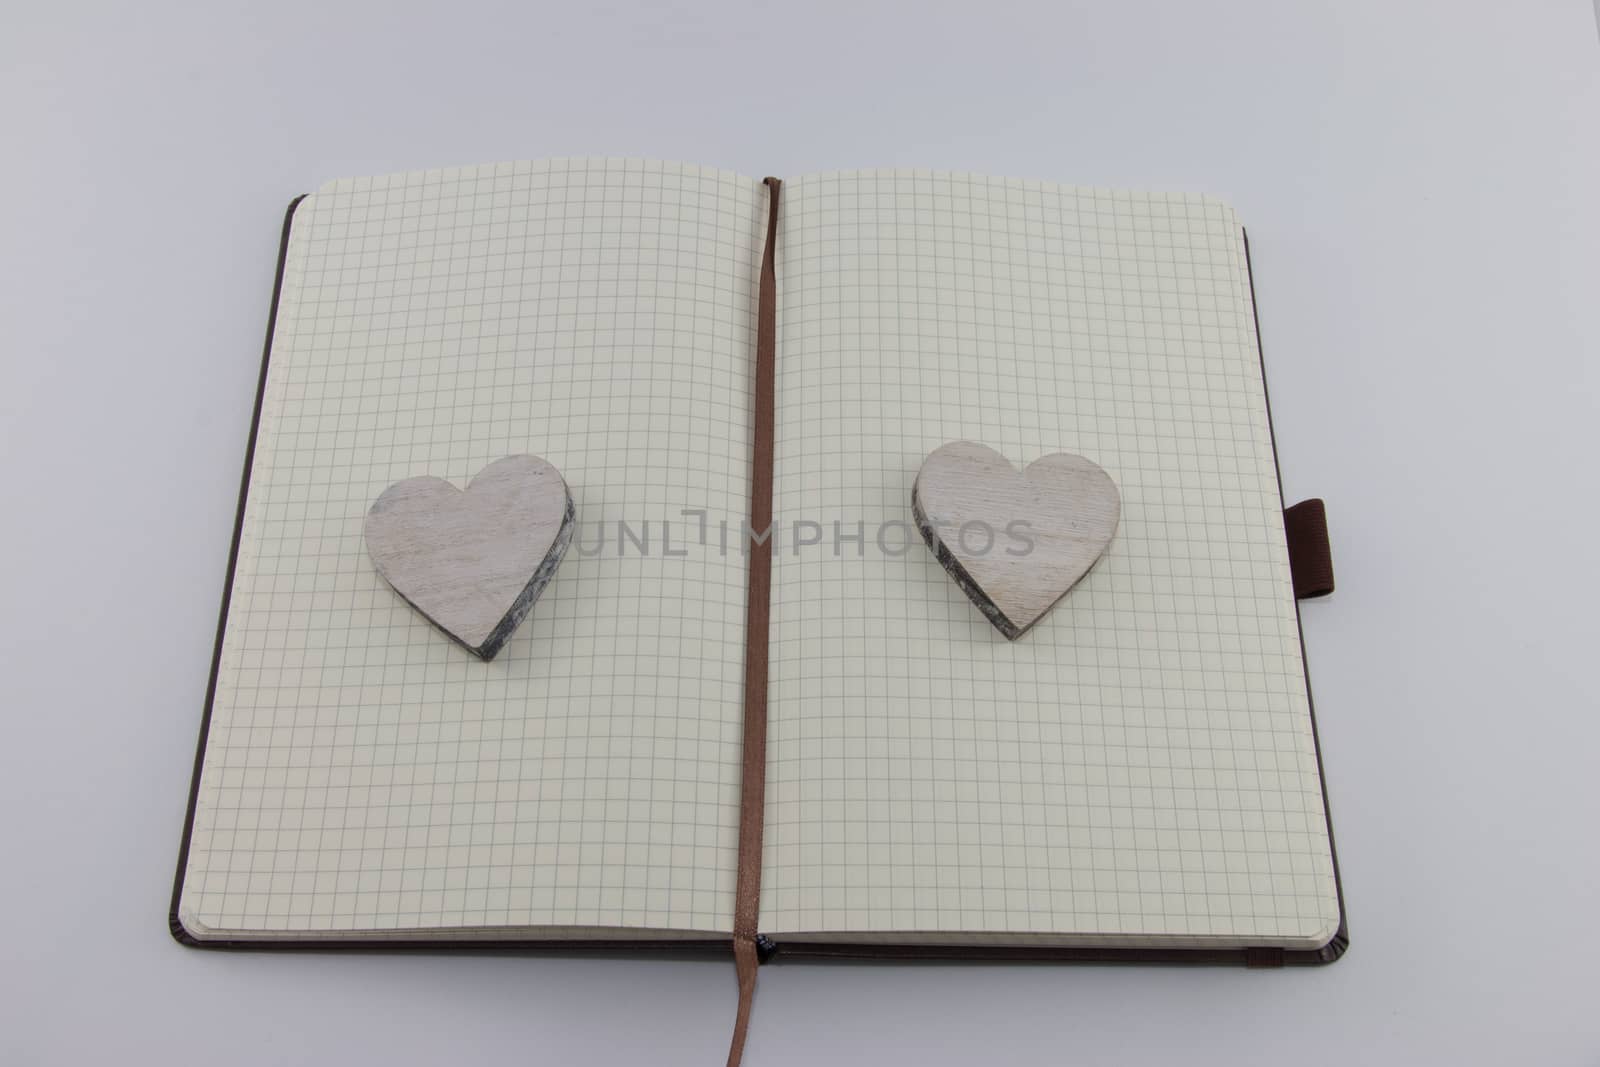 Opened notebook with wooden heart on each side